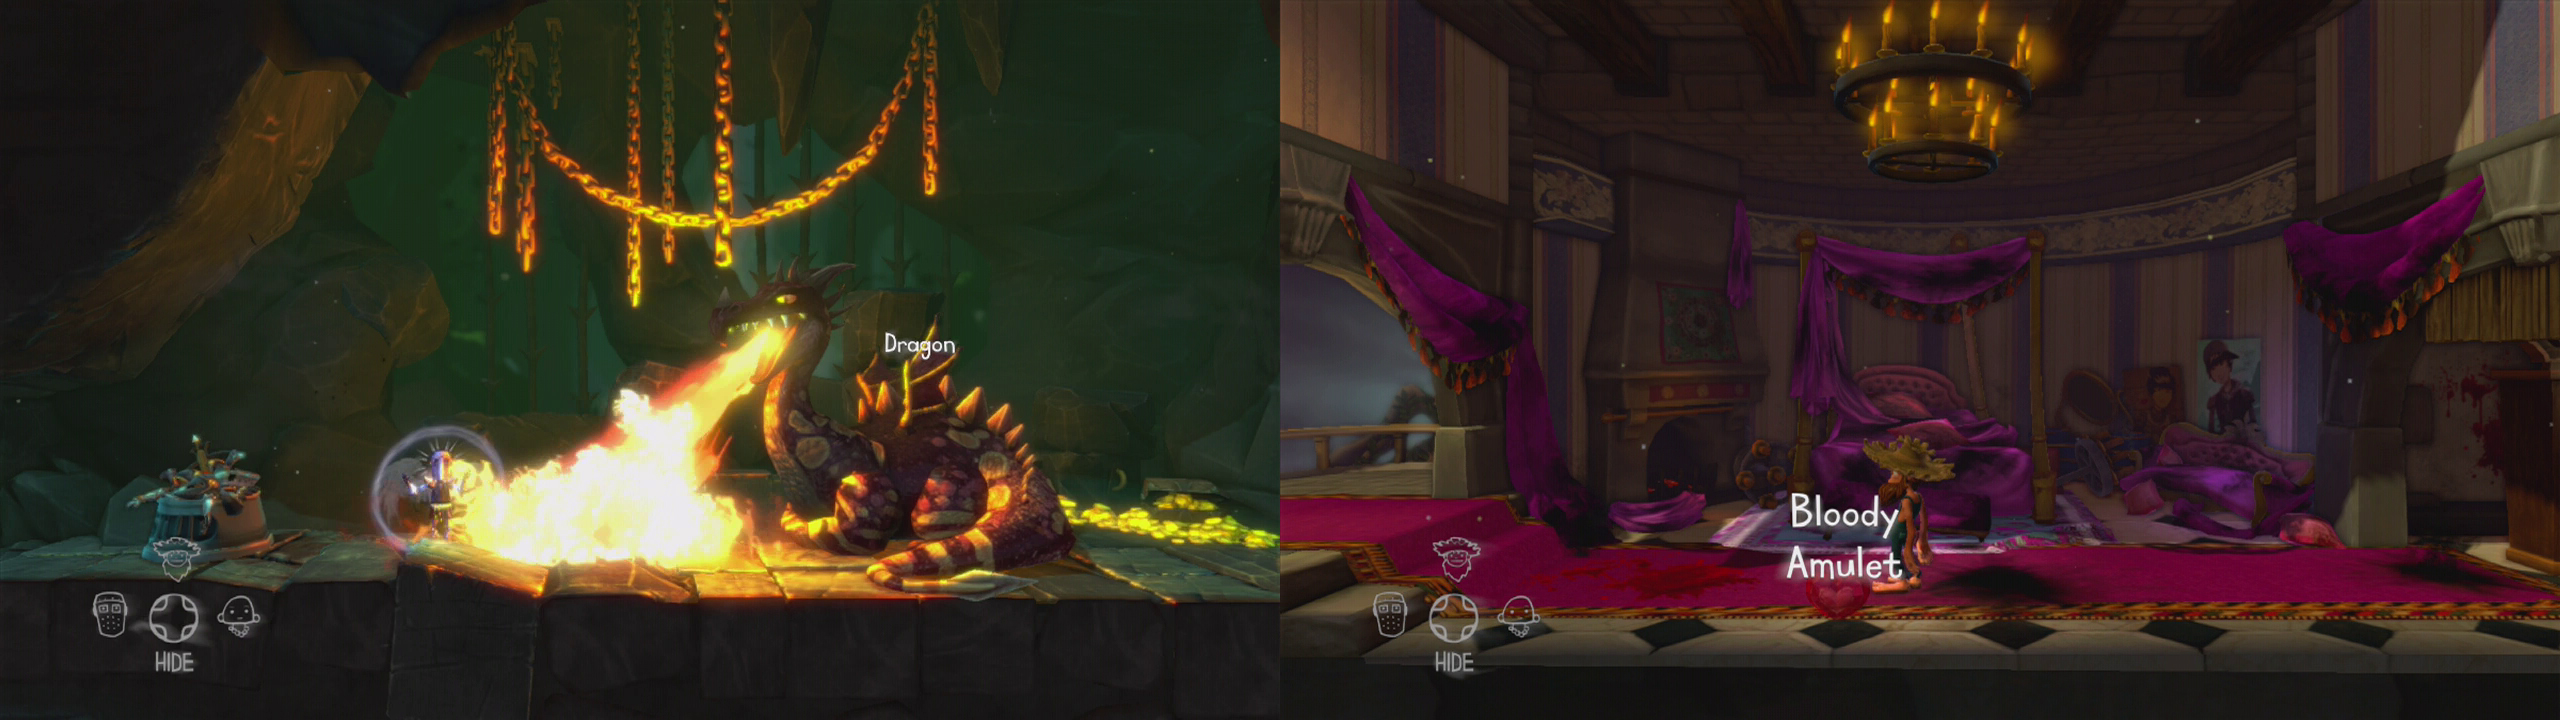 Use the knight’s special ability to distract the dragon (left) whilst an ally steals his treasure. Return to the Princess’s Room in the keep for the Bloody Amulet (right).